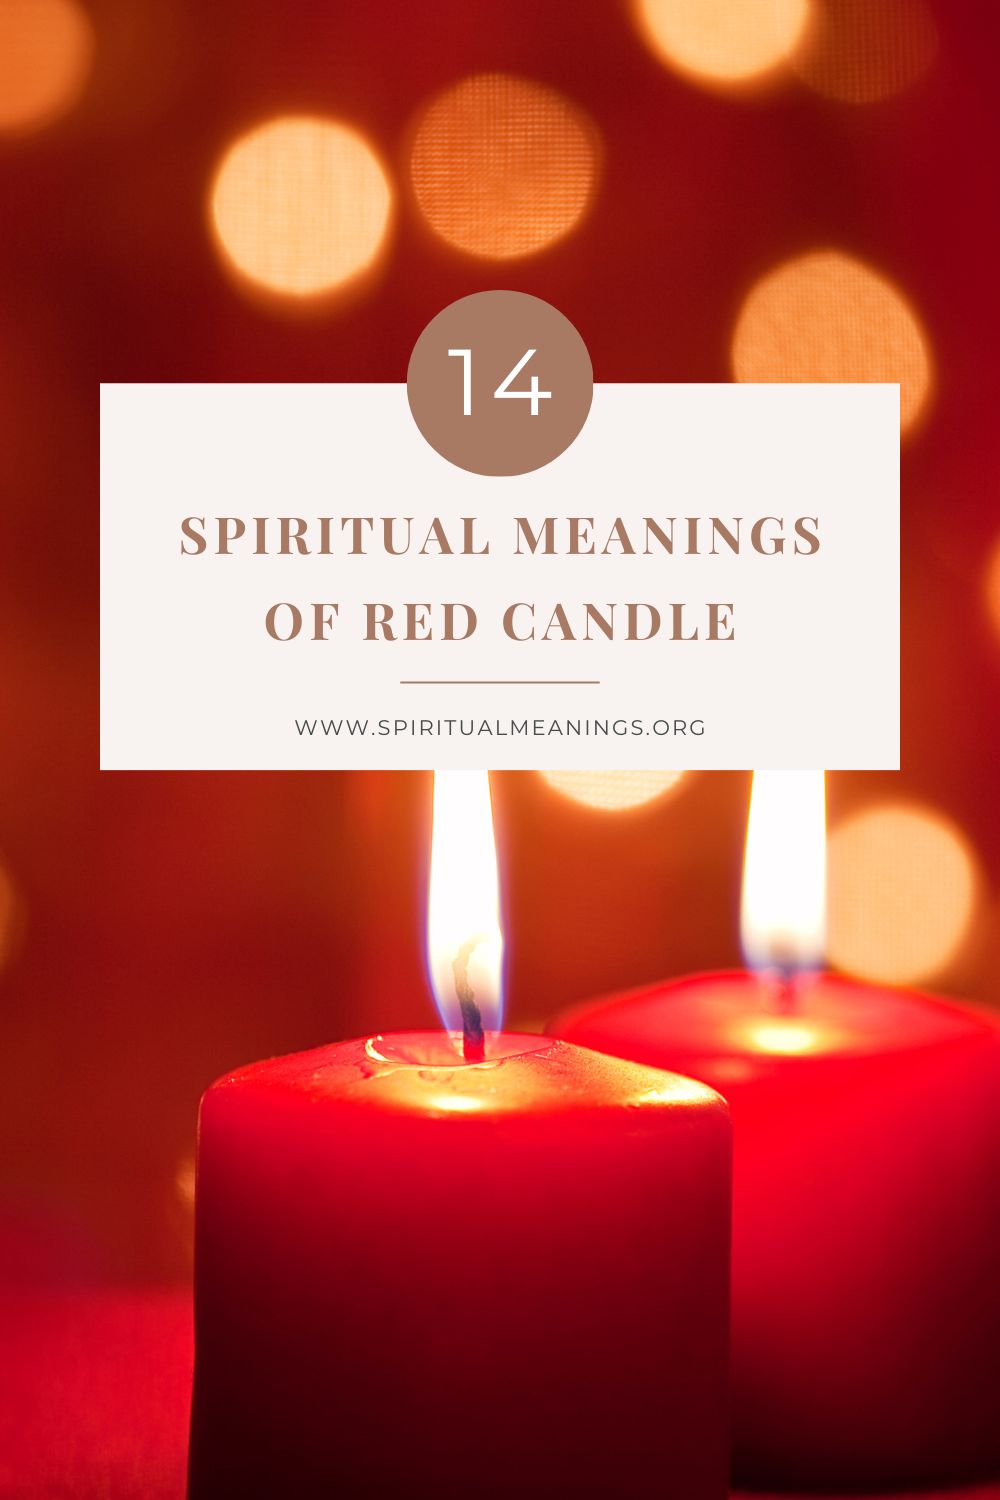 Tips for burning red candles